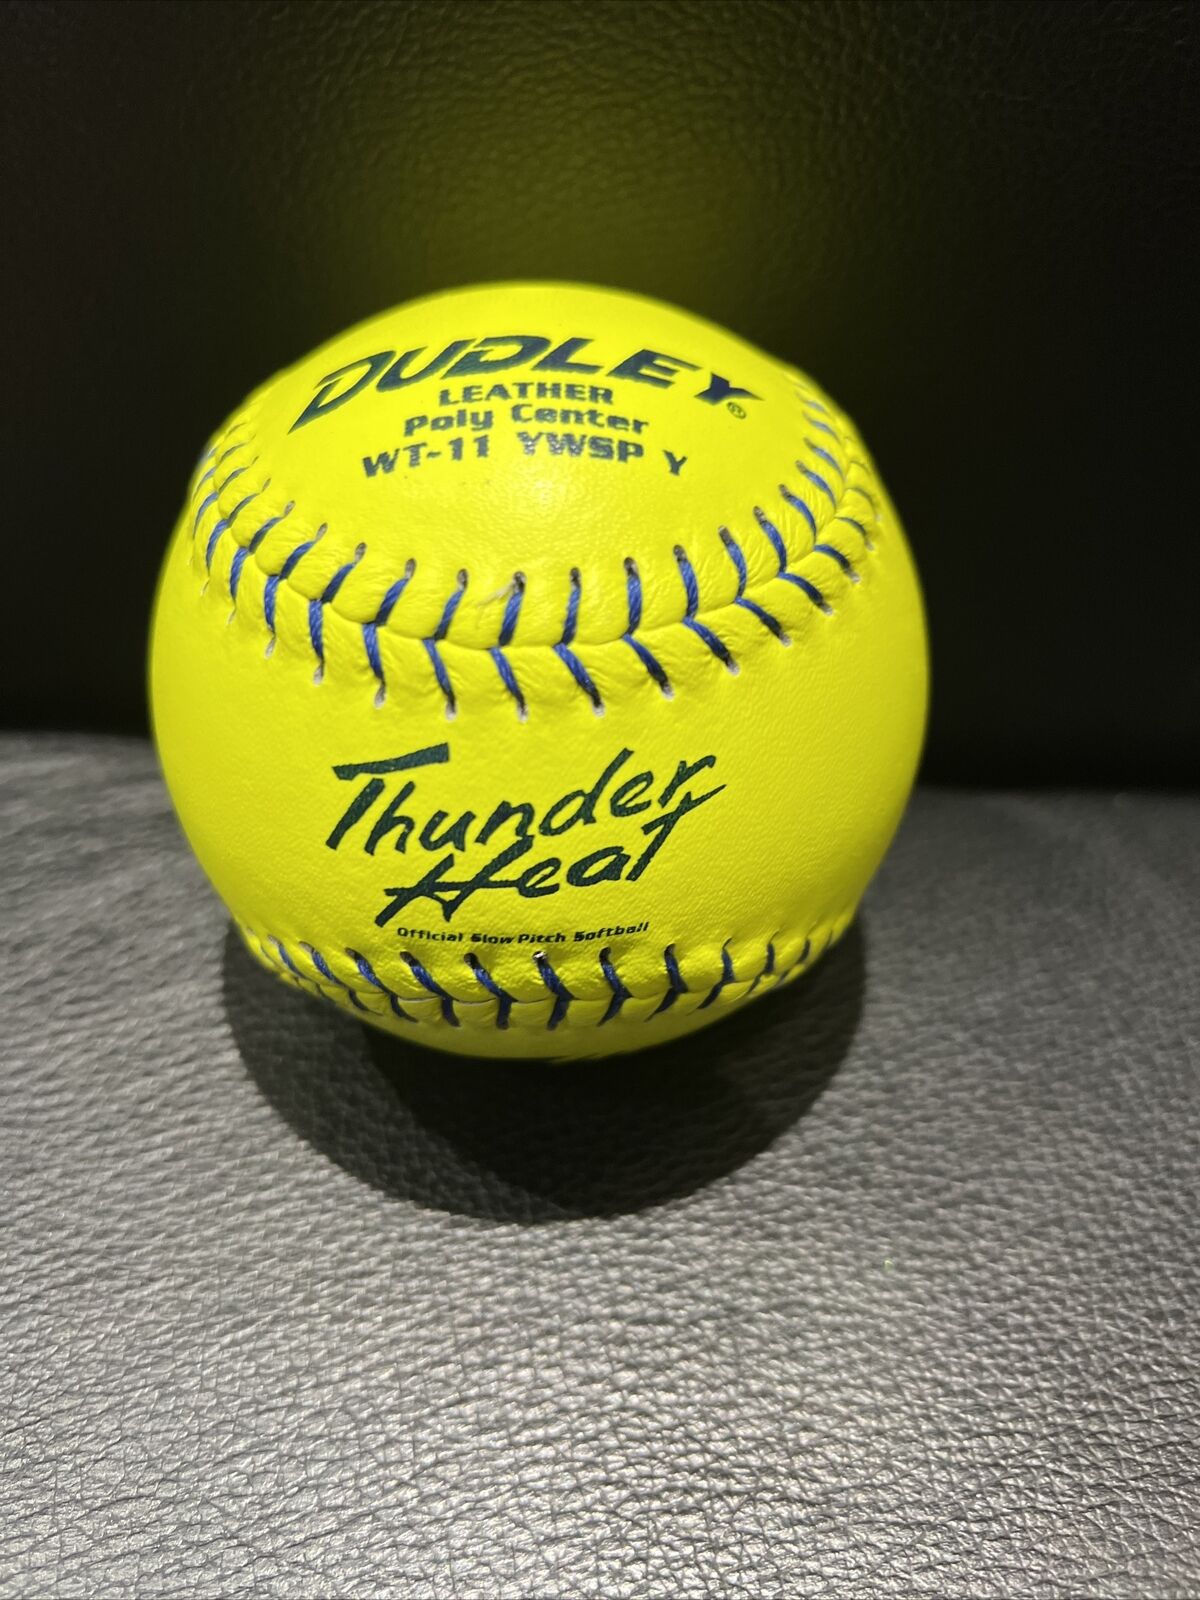 New Dudley Nfhs Thunder Heat Leather 12" Yellow Fast Pitch Softball .47/375